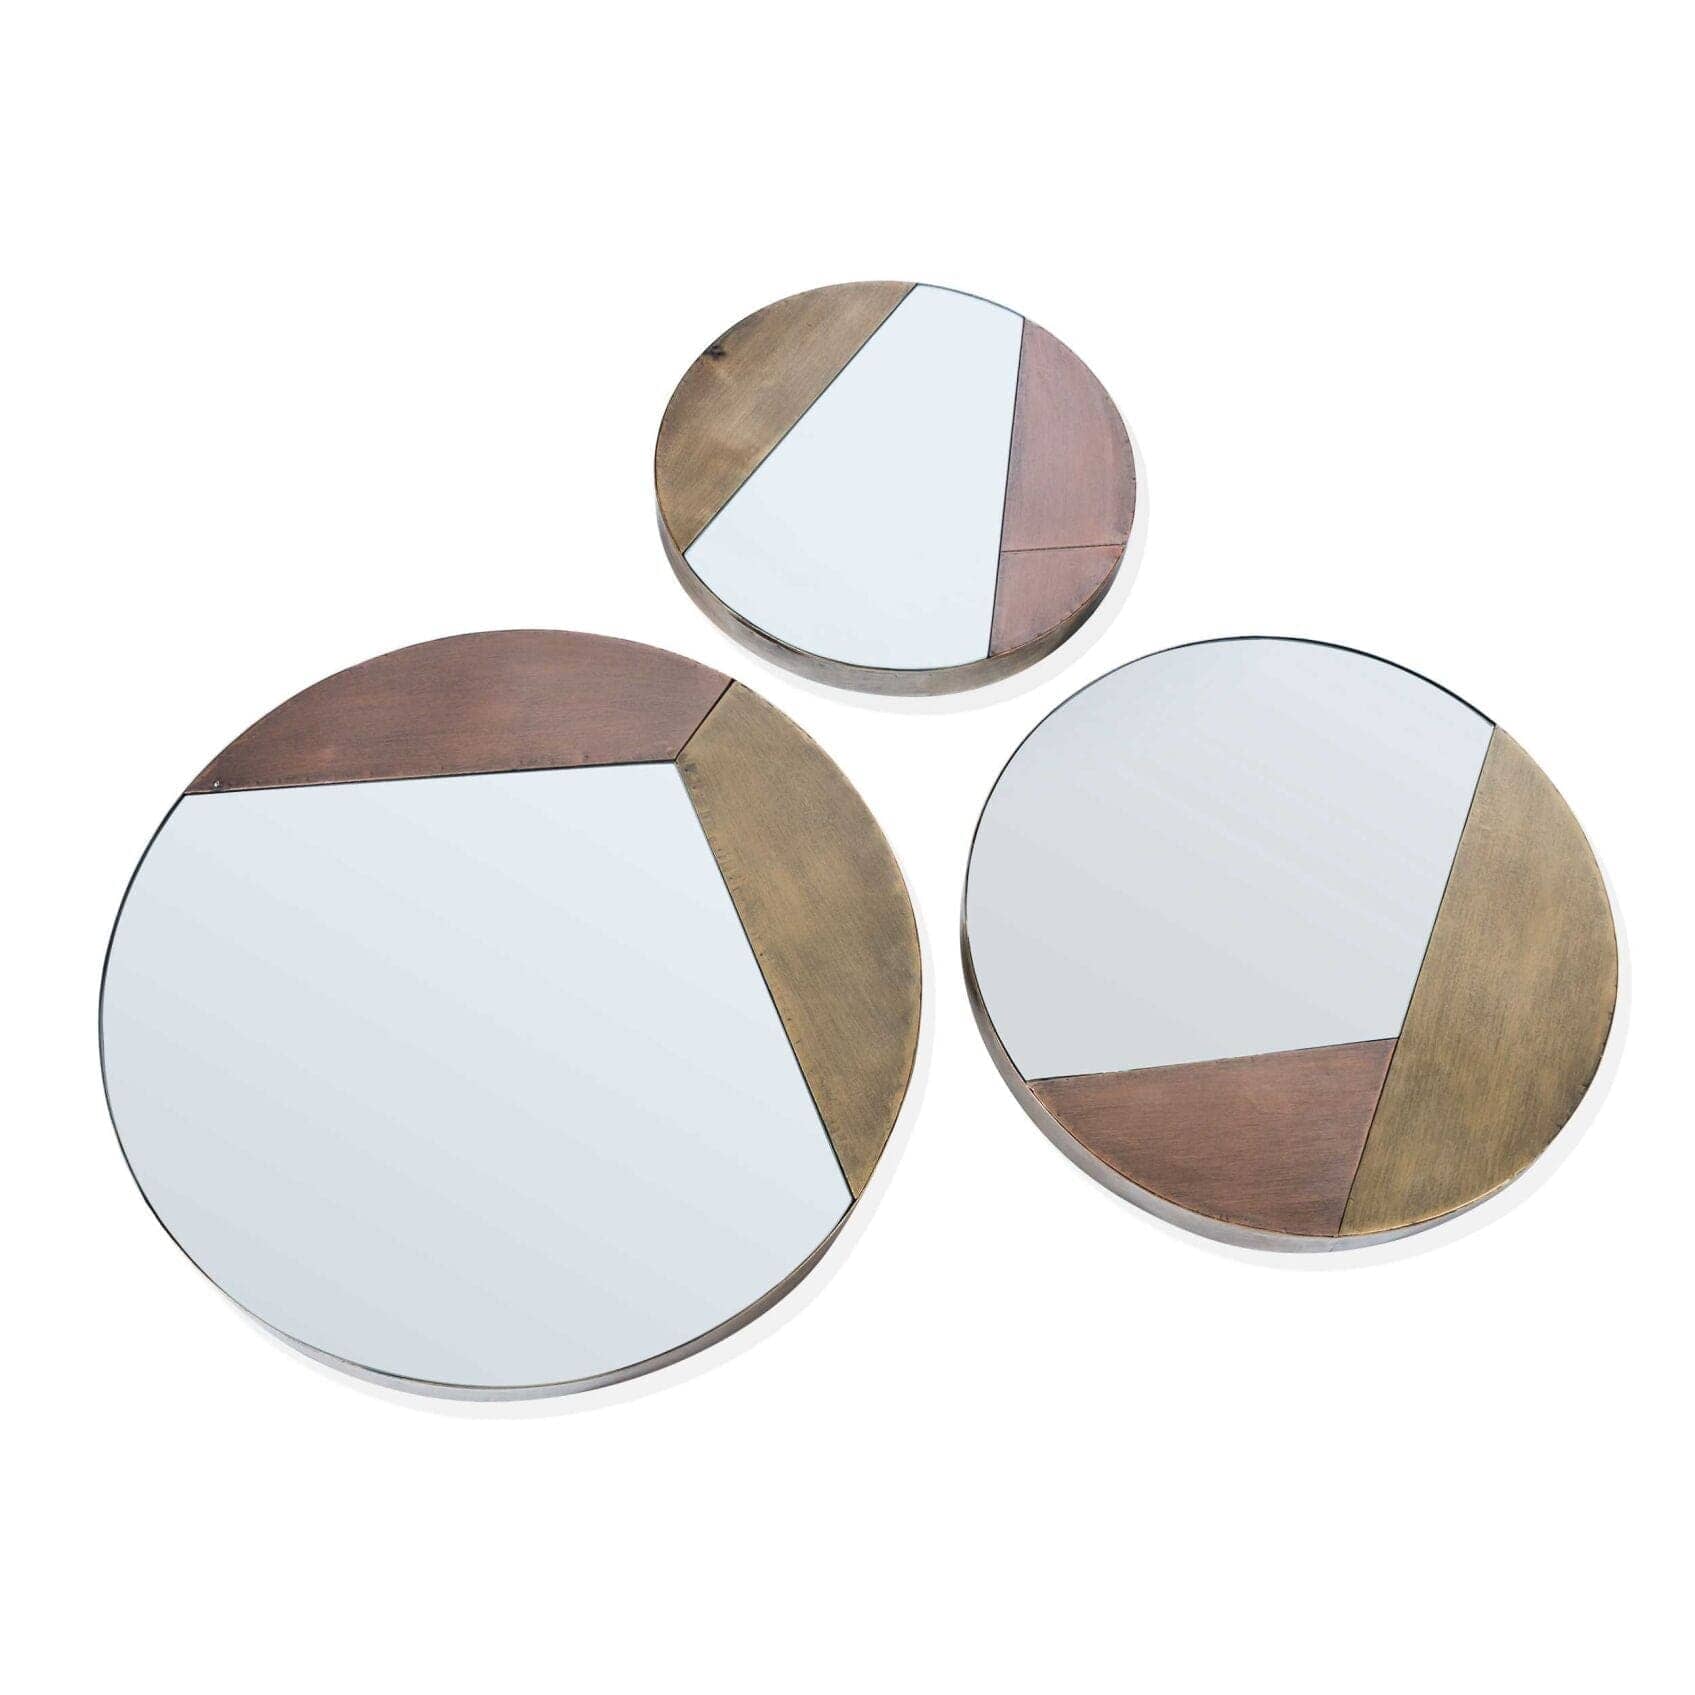 Overhead view of the Maklin 3 round mirrors framed in gold metal